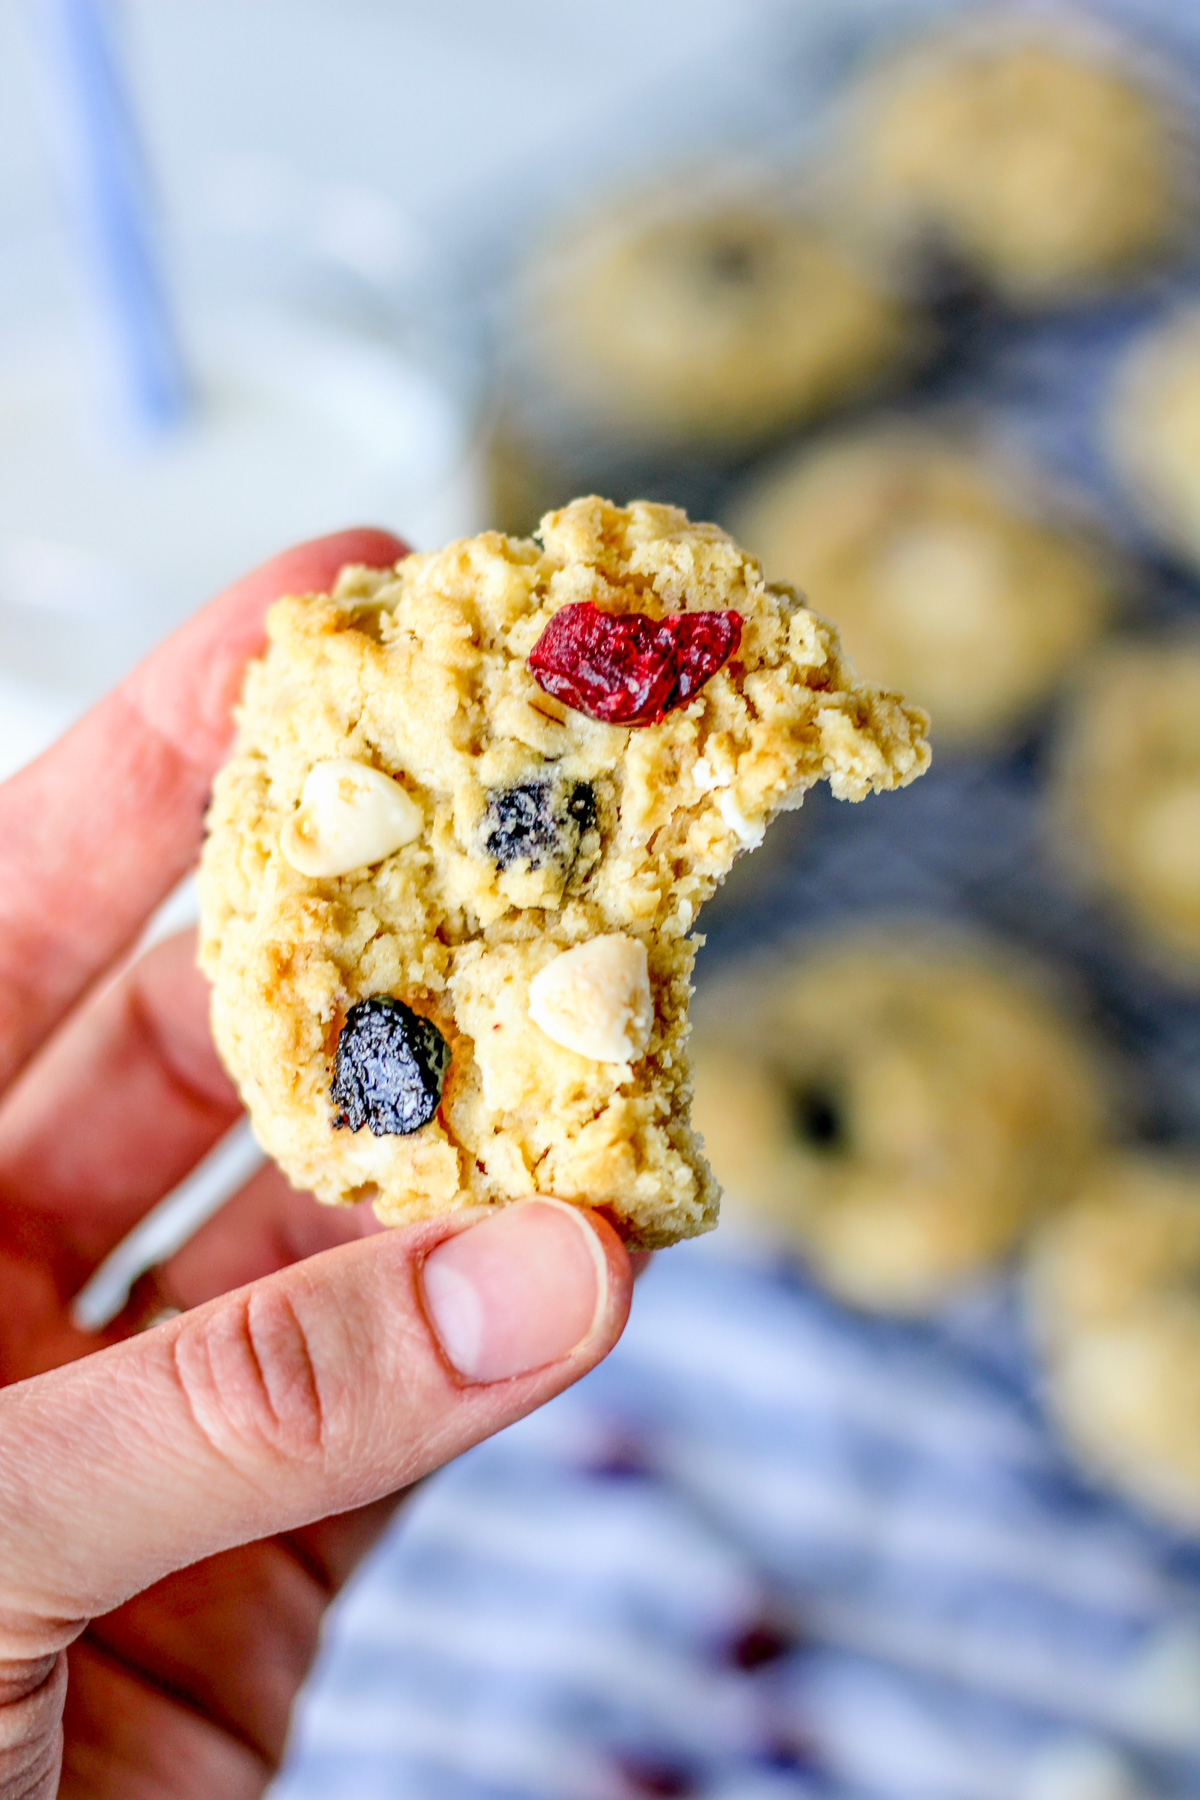 hand holding an oatmeal cookie with white chocolate chips, cranberries and blueberries